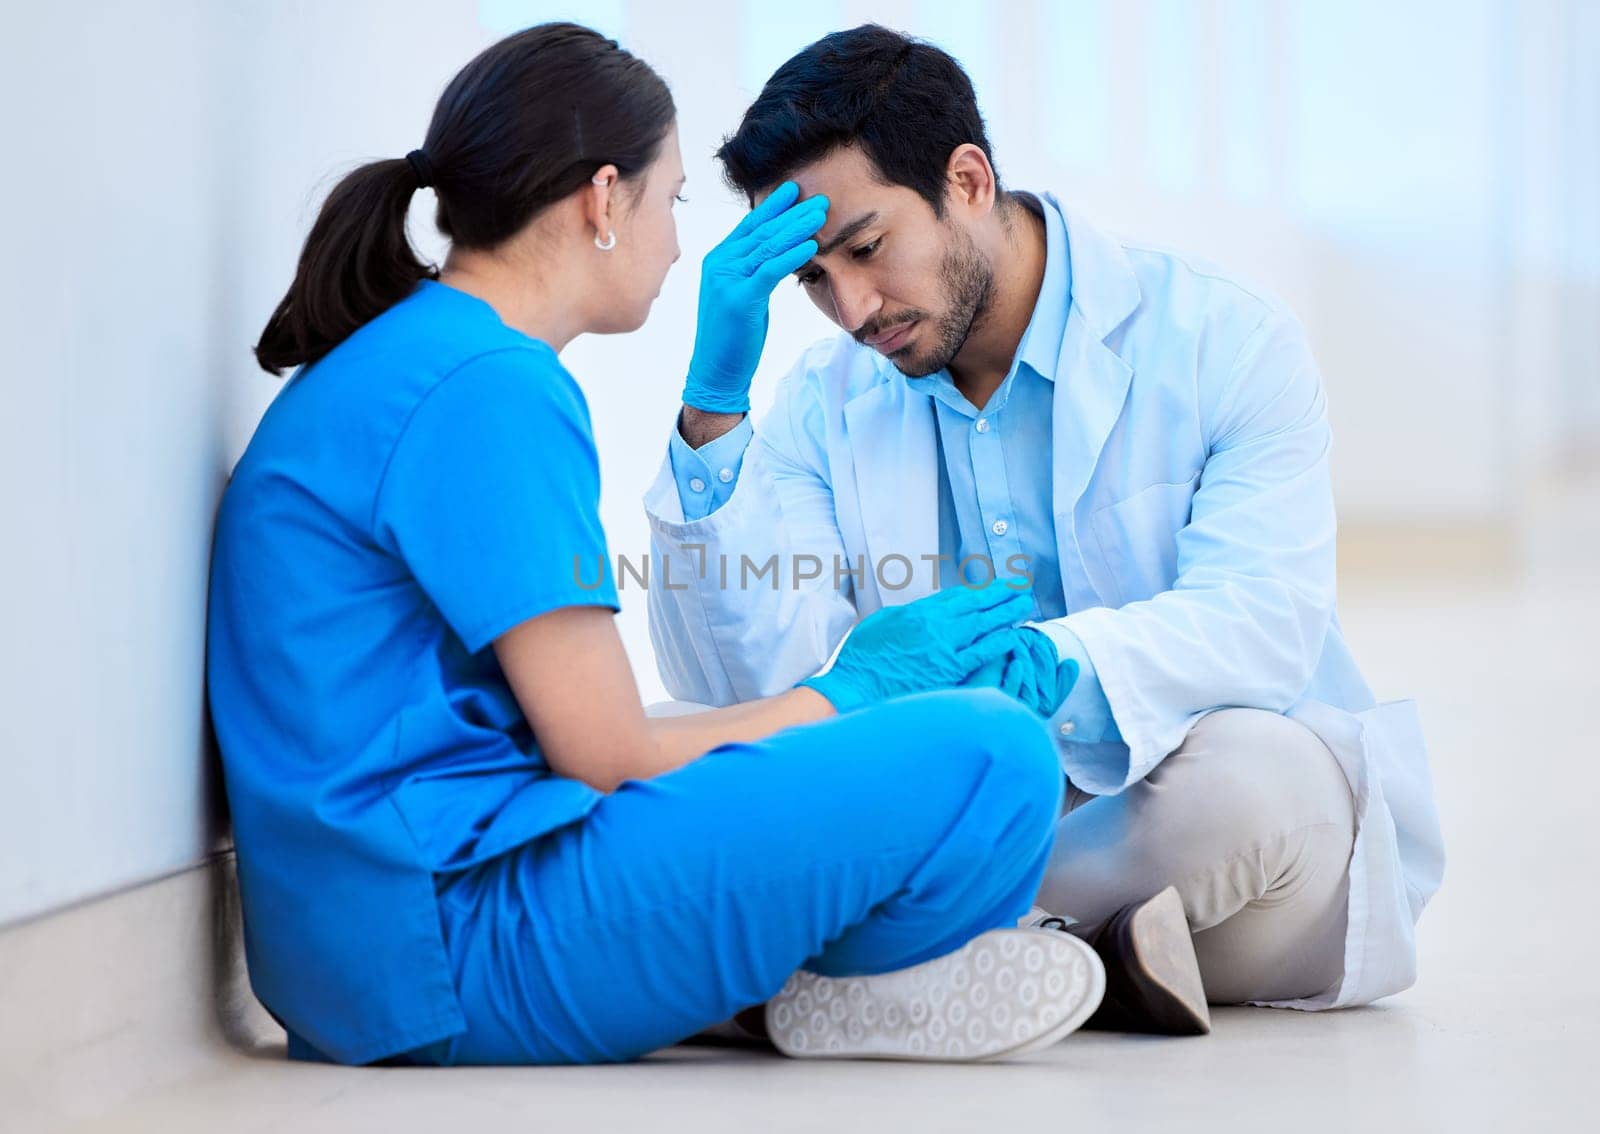 Its been a long day. a dental assistant giving her coworker support